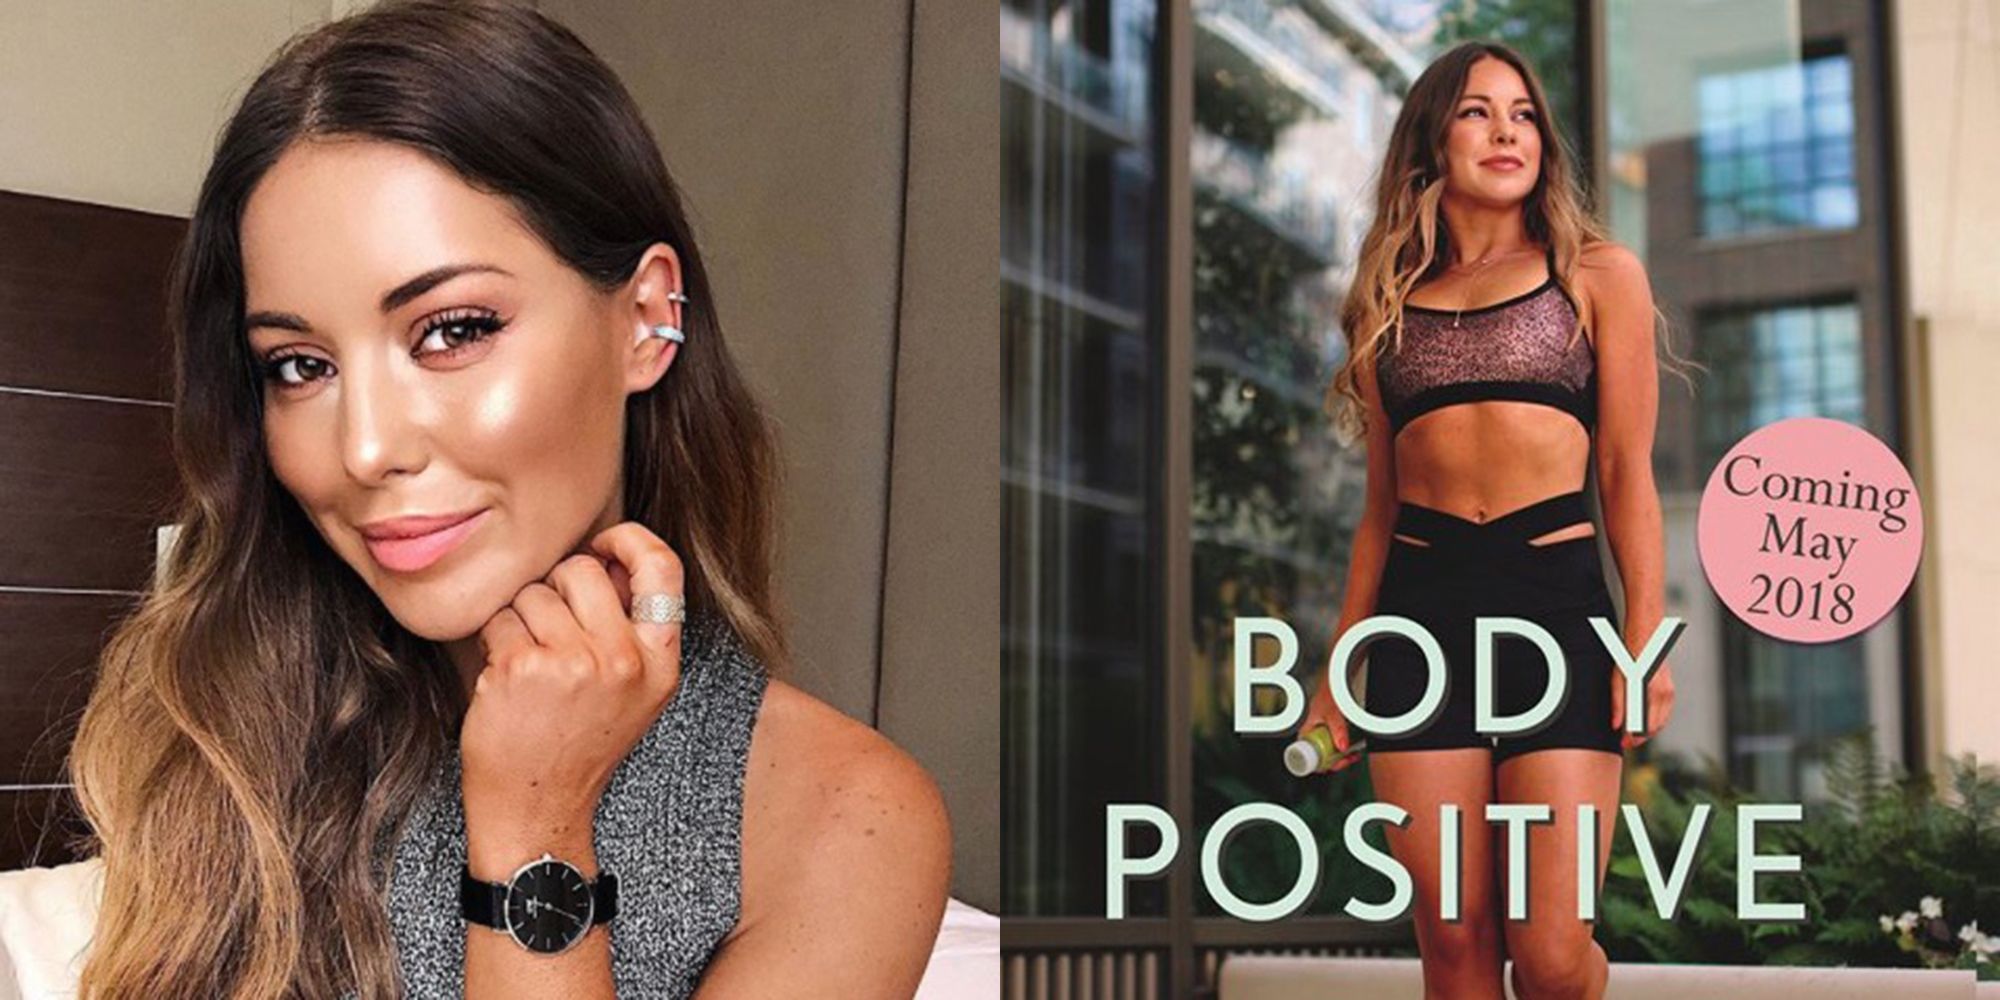 Louise Thompson's new book is causing controversy